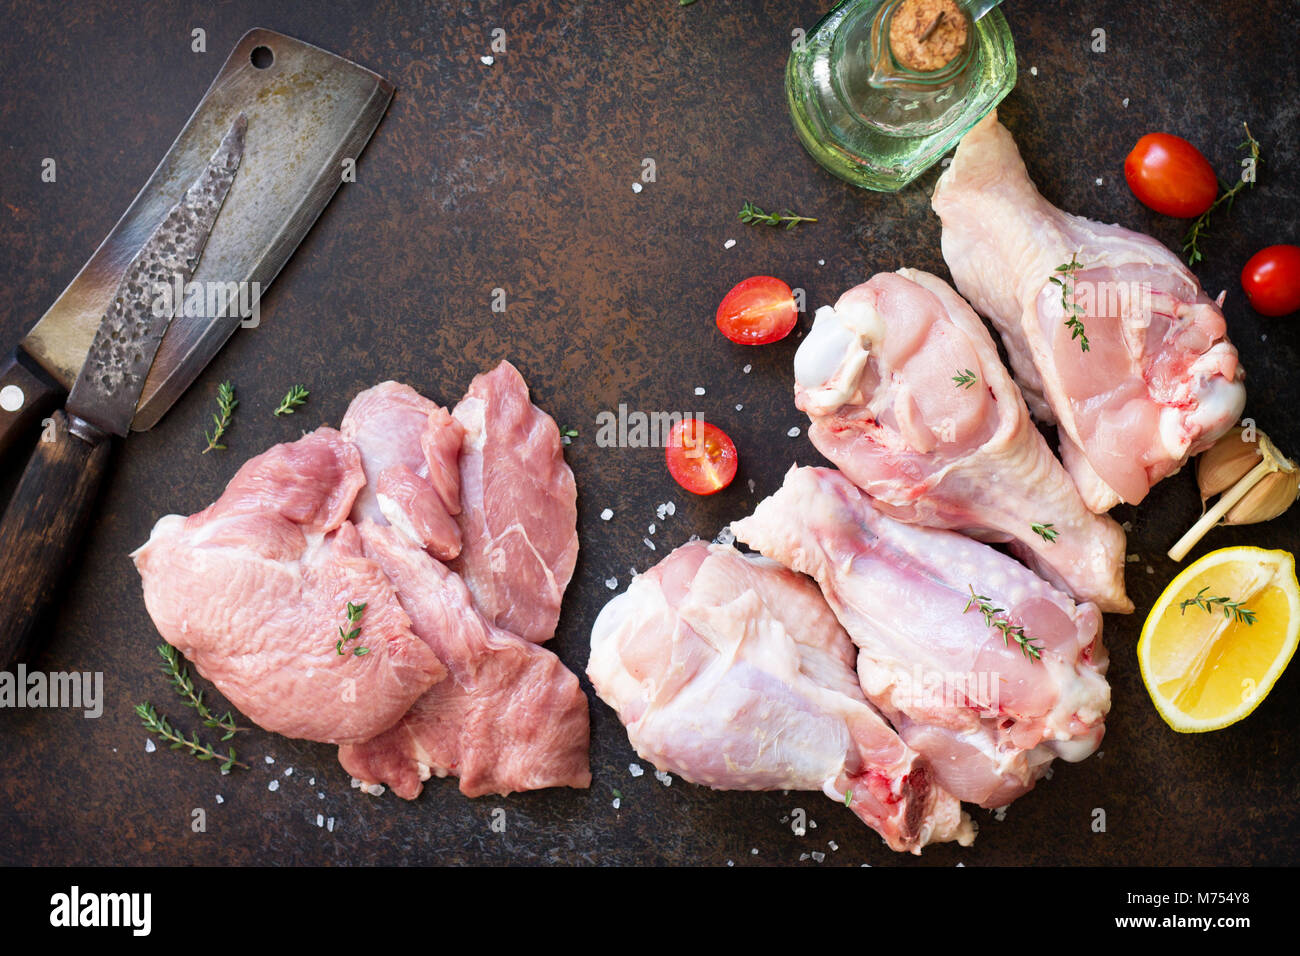 Fresh meat. Raw turkey shin, tomatoes, lemons and spices on a stone table. Stock Photo